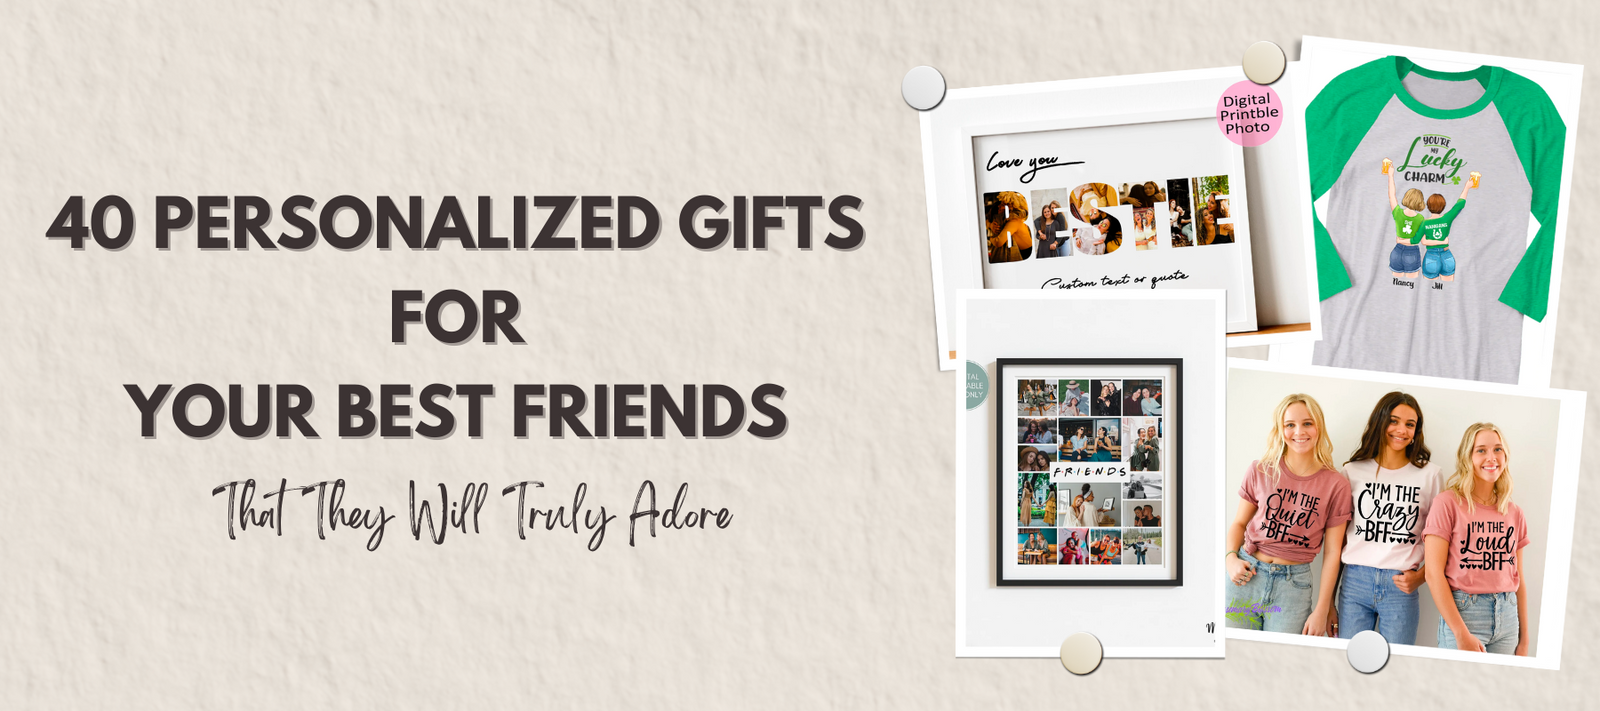 5 Awesome Personalized Gifts for Your Best Friends | Best friend christmas  gifts, Unique birthday gifts, Awesome personalized gifts